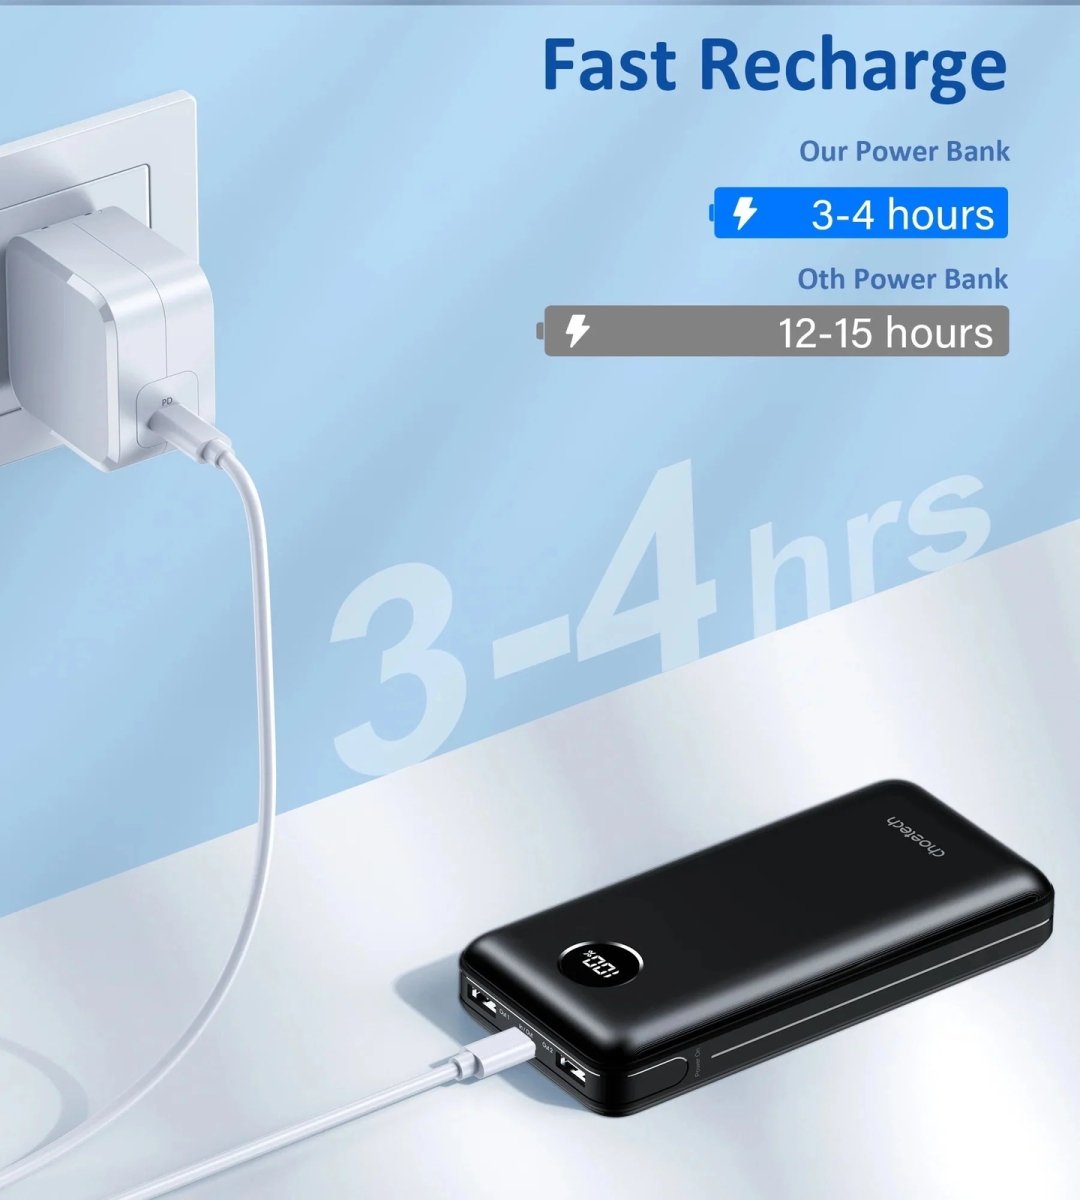 CHOETECH B653 PD45W 20000mAh Power Bank Fast Charging Battery Portable Charger